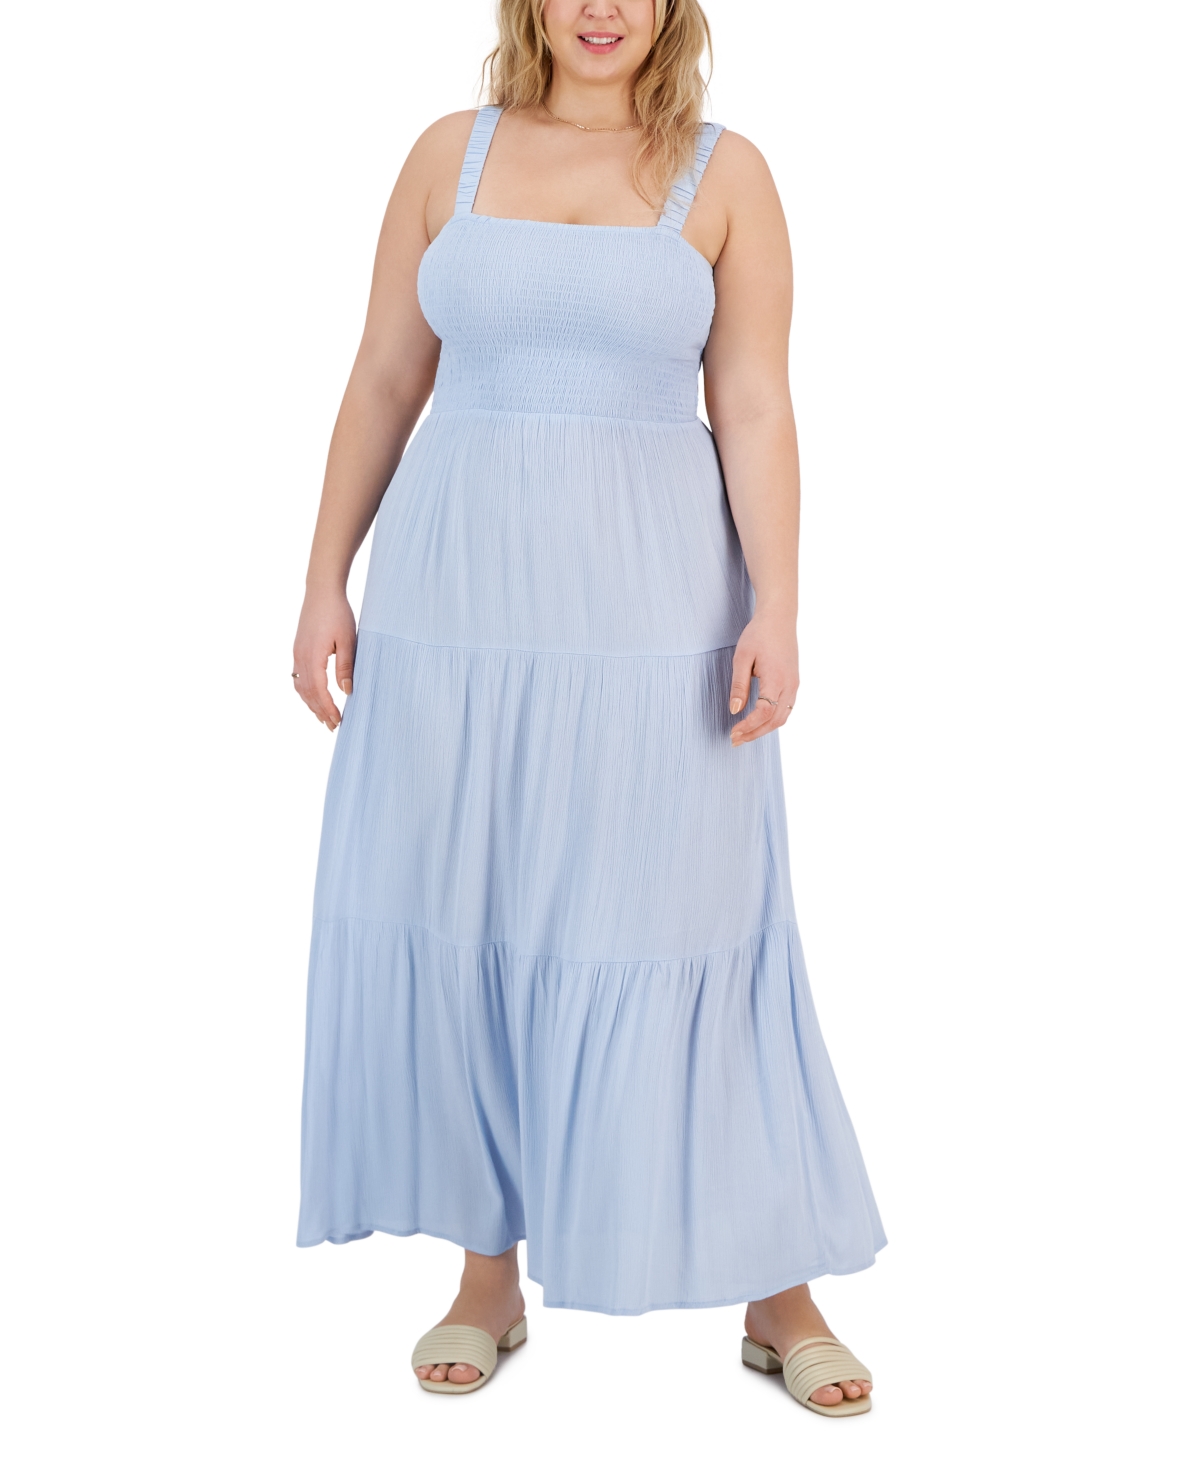 Full Circle Trends Trendy Plus Size Tiered Maxi Dress